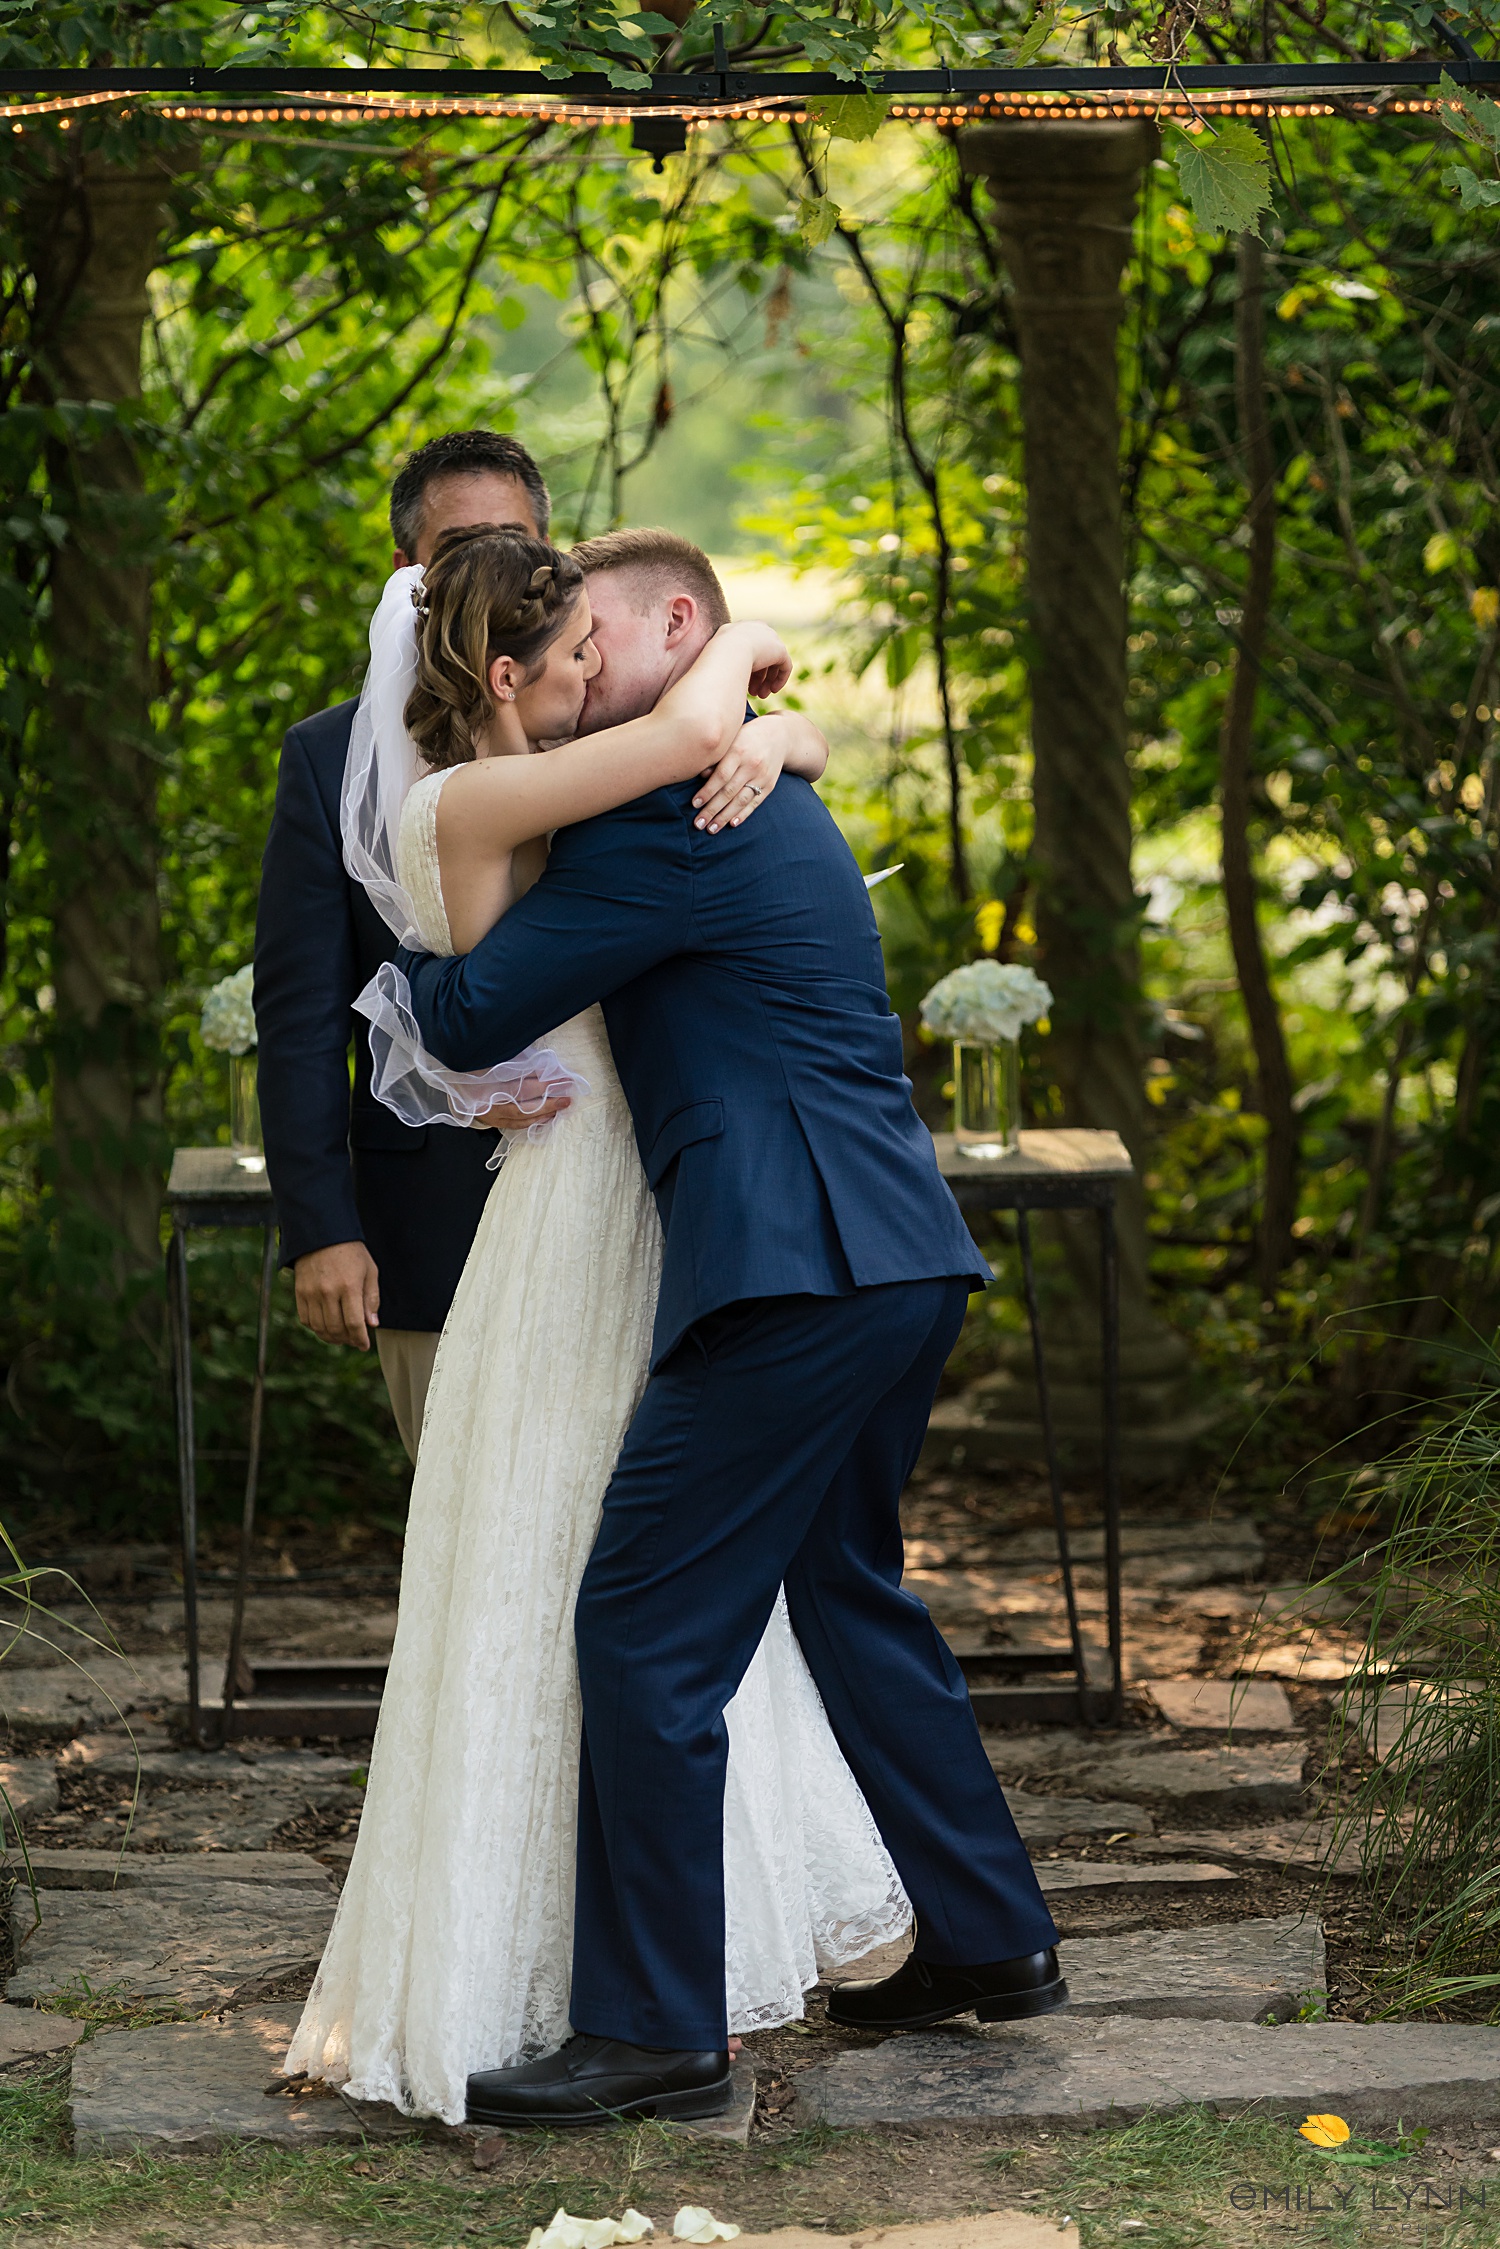 First kiss photo during the ceremony. Wedding-Photos-at-Enchanted-Acres-KC-Wedding-Photographer-Emily-Lynn-Photography.